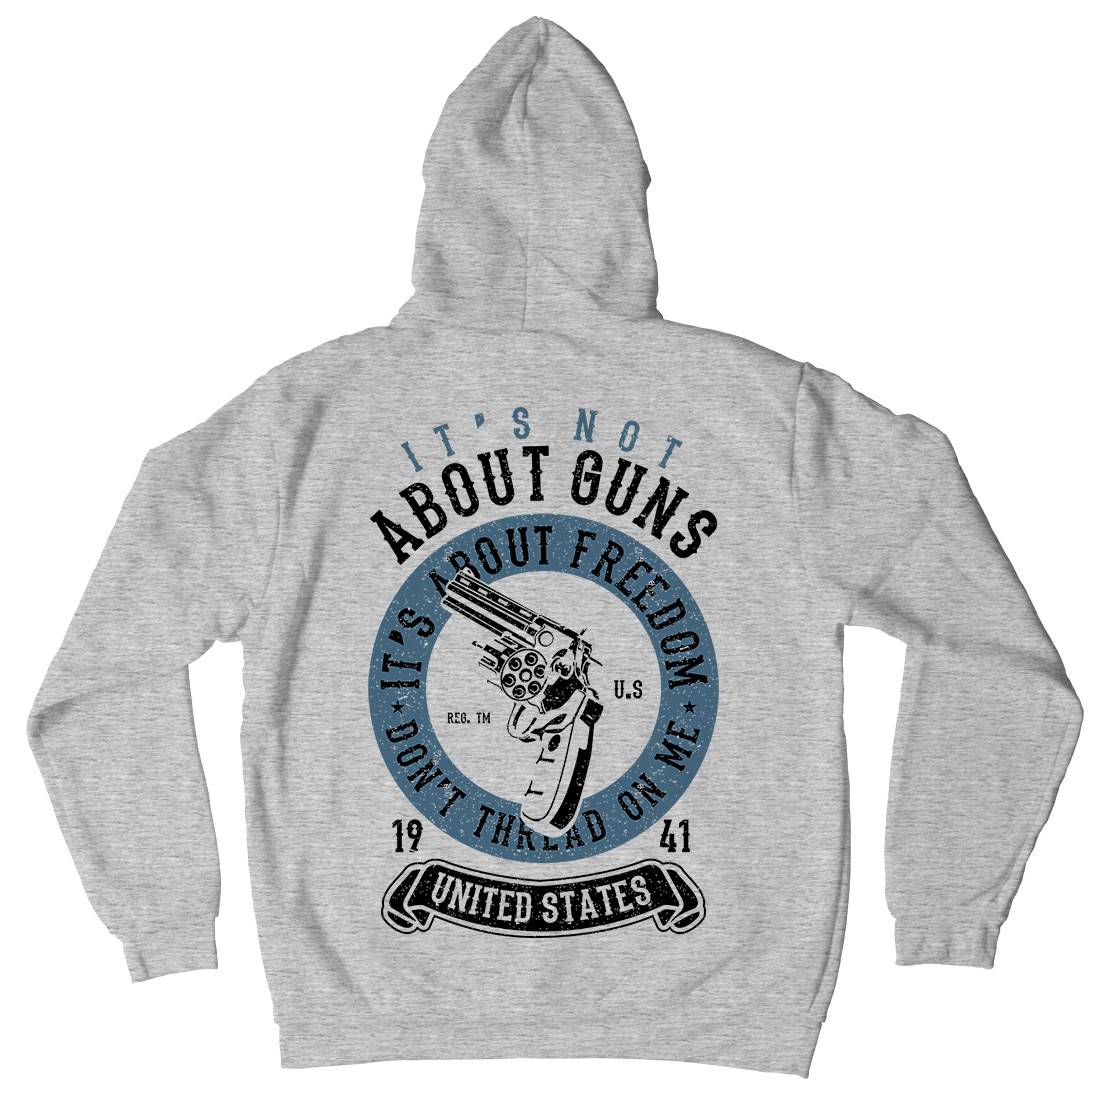 It&#39;s About Freedom Kids Crew Neck Hoodie Quotes A693